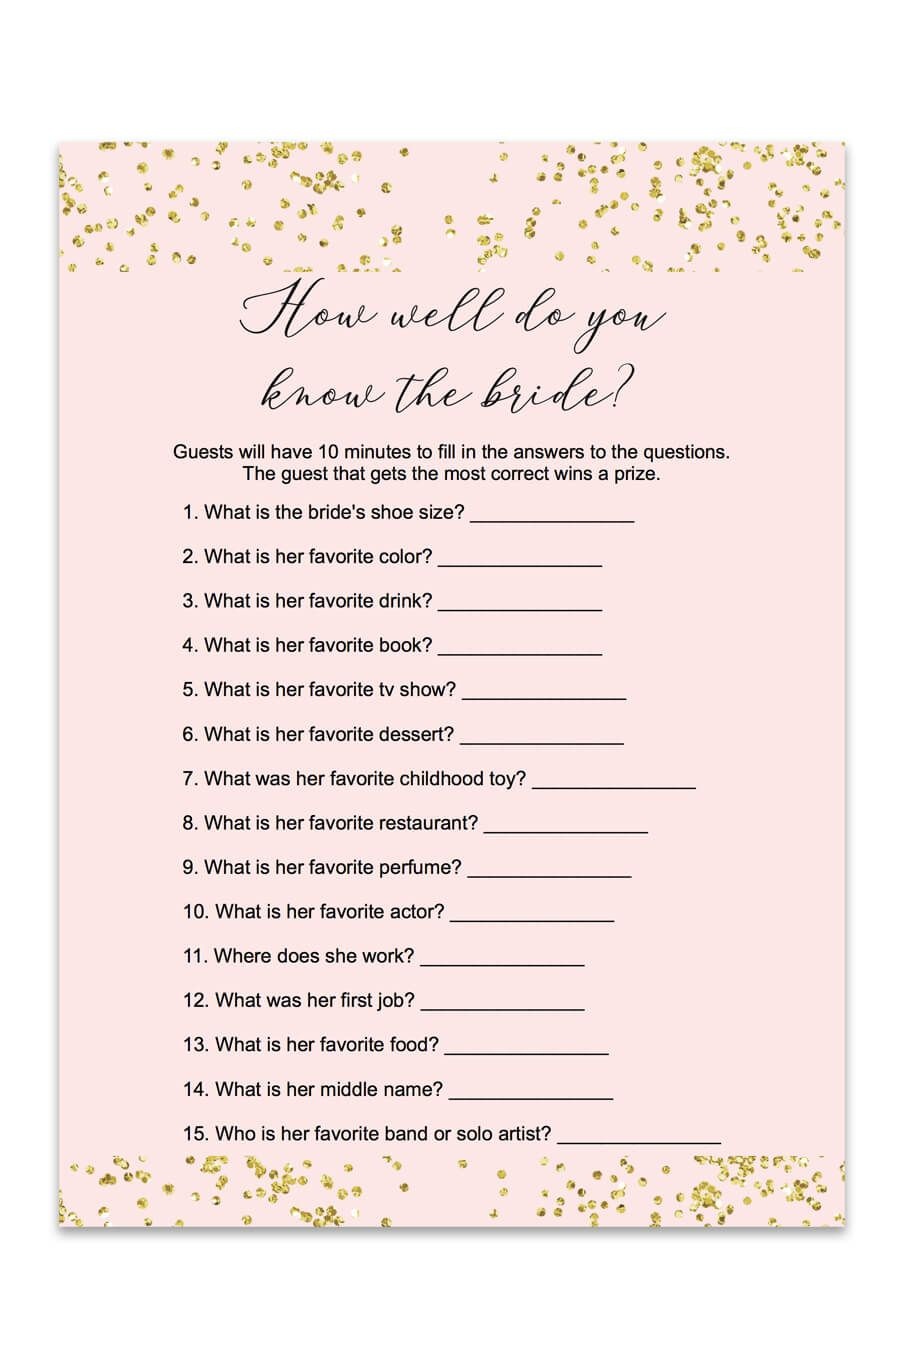 Blush And Confetti How Well Do You Know The Bride Game | Love&lt;3 - Free Printable Bridal Shower Games Word Scramble